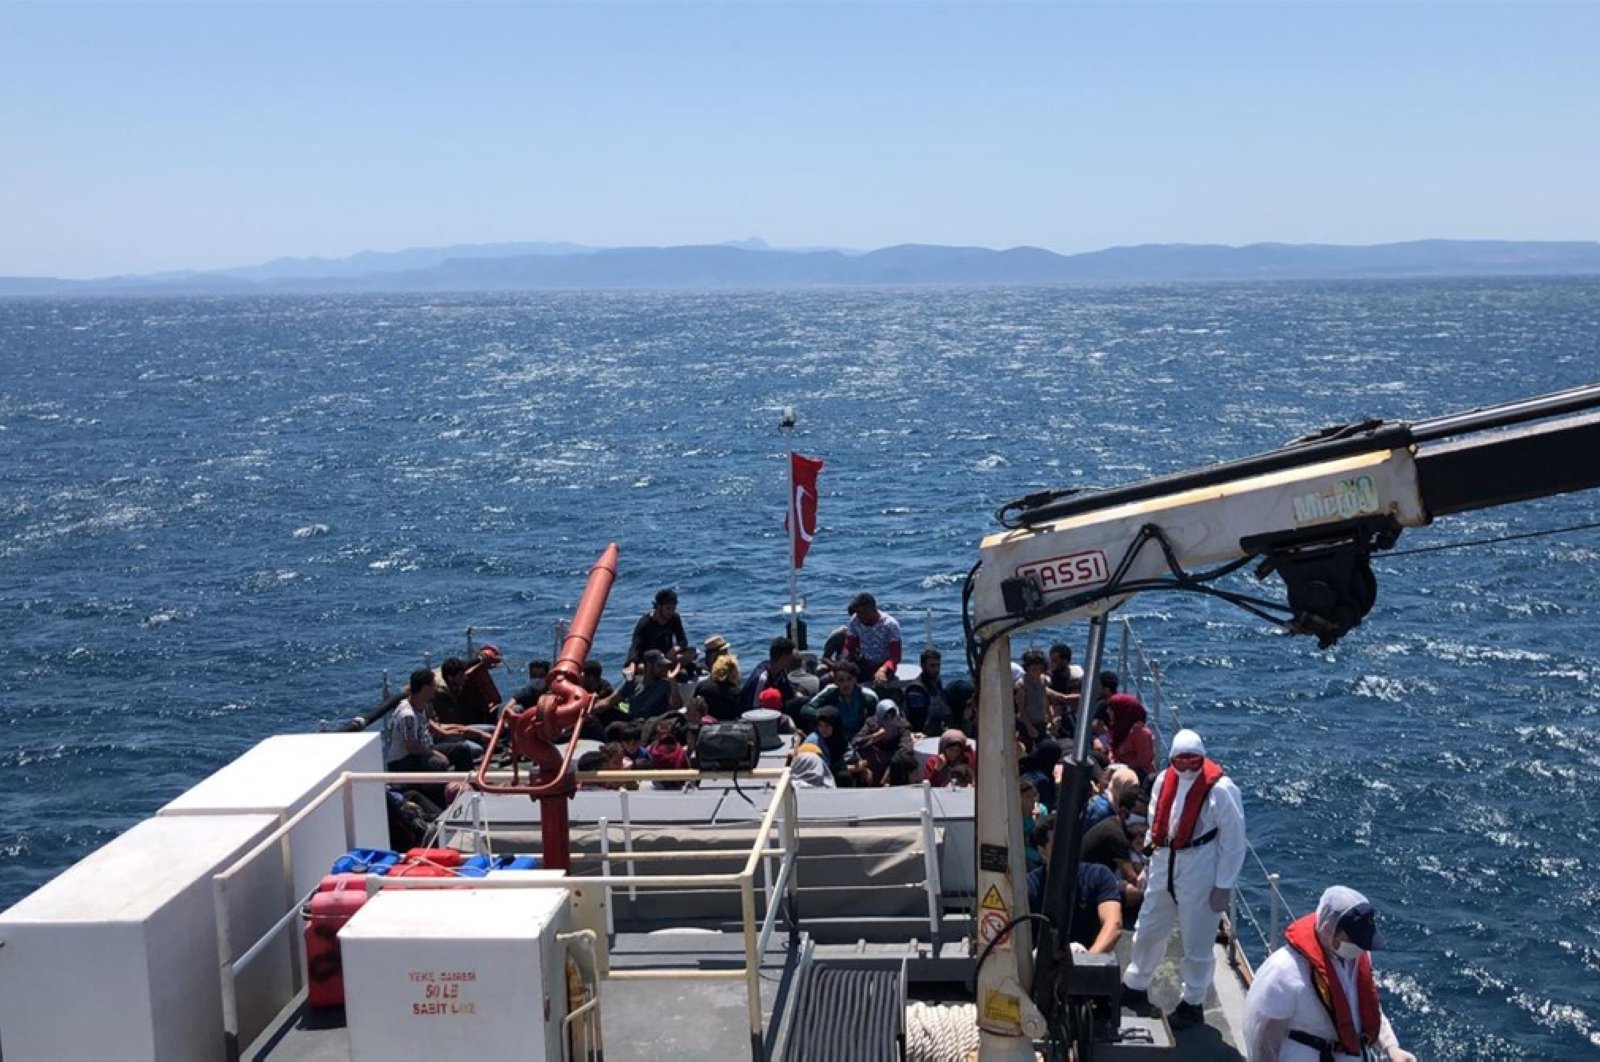 The Turkish coast guard rescues 57 migrants, who set off for the Greek island of Lesbos, in the Aegean Sea off the coast of Ayvalık in the Balıkesir province, July 9, 2020. (AA Photo)